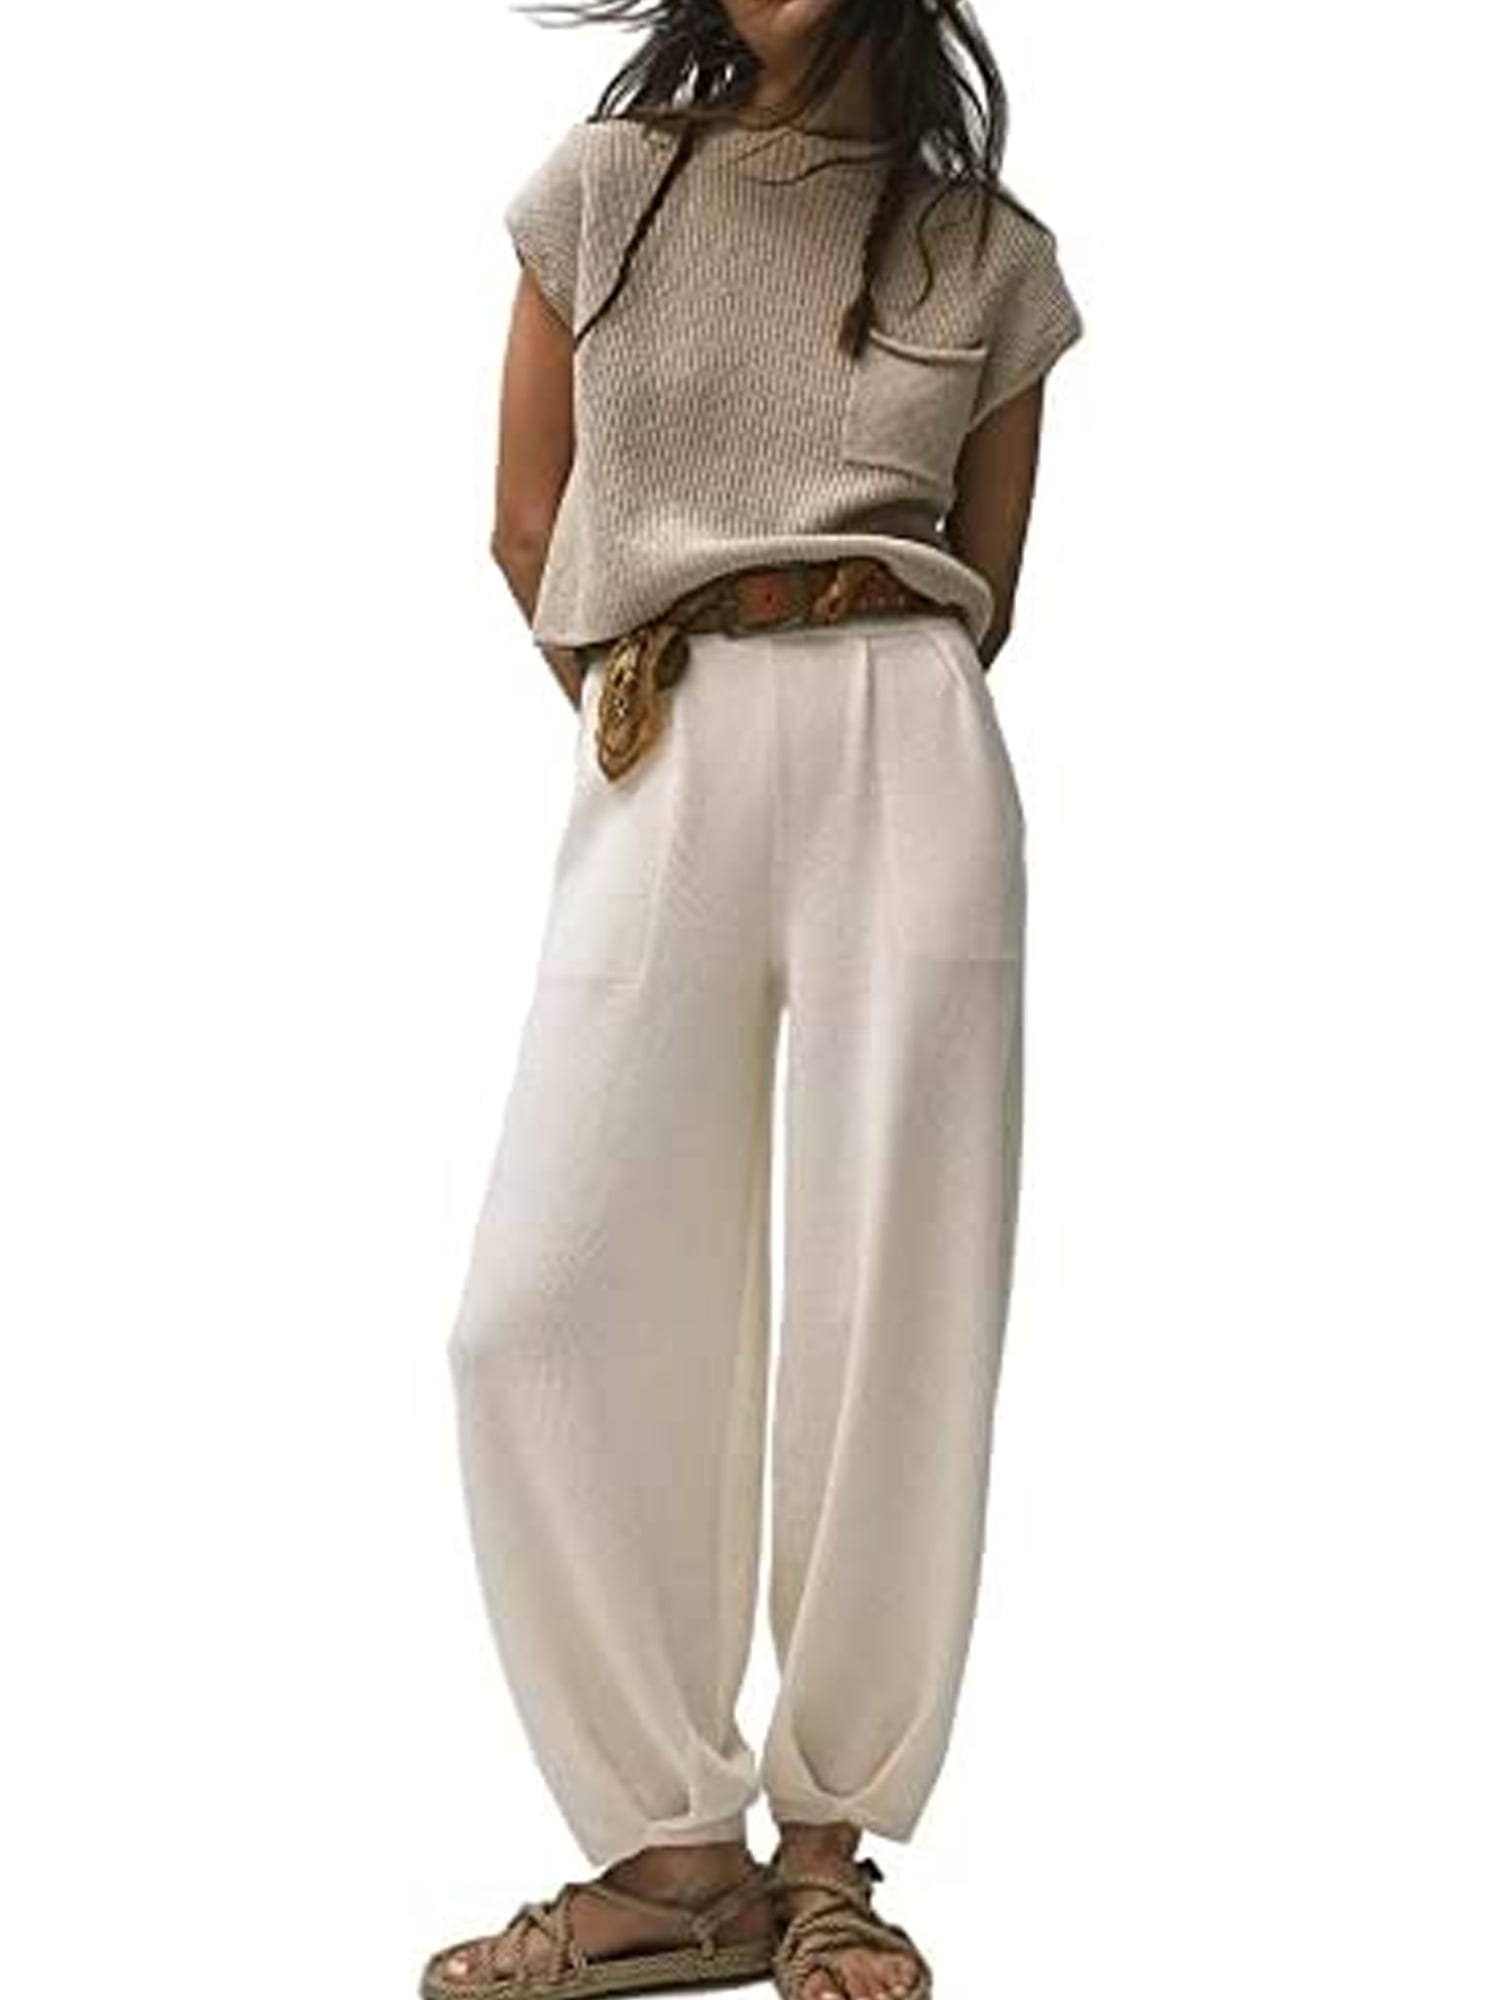 Sweater Sets Women Two Piece Outfits Casual Round Neck Pullover Top Knit  Wide Leg Pants Sweater Lounge Sets Sweatsuit